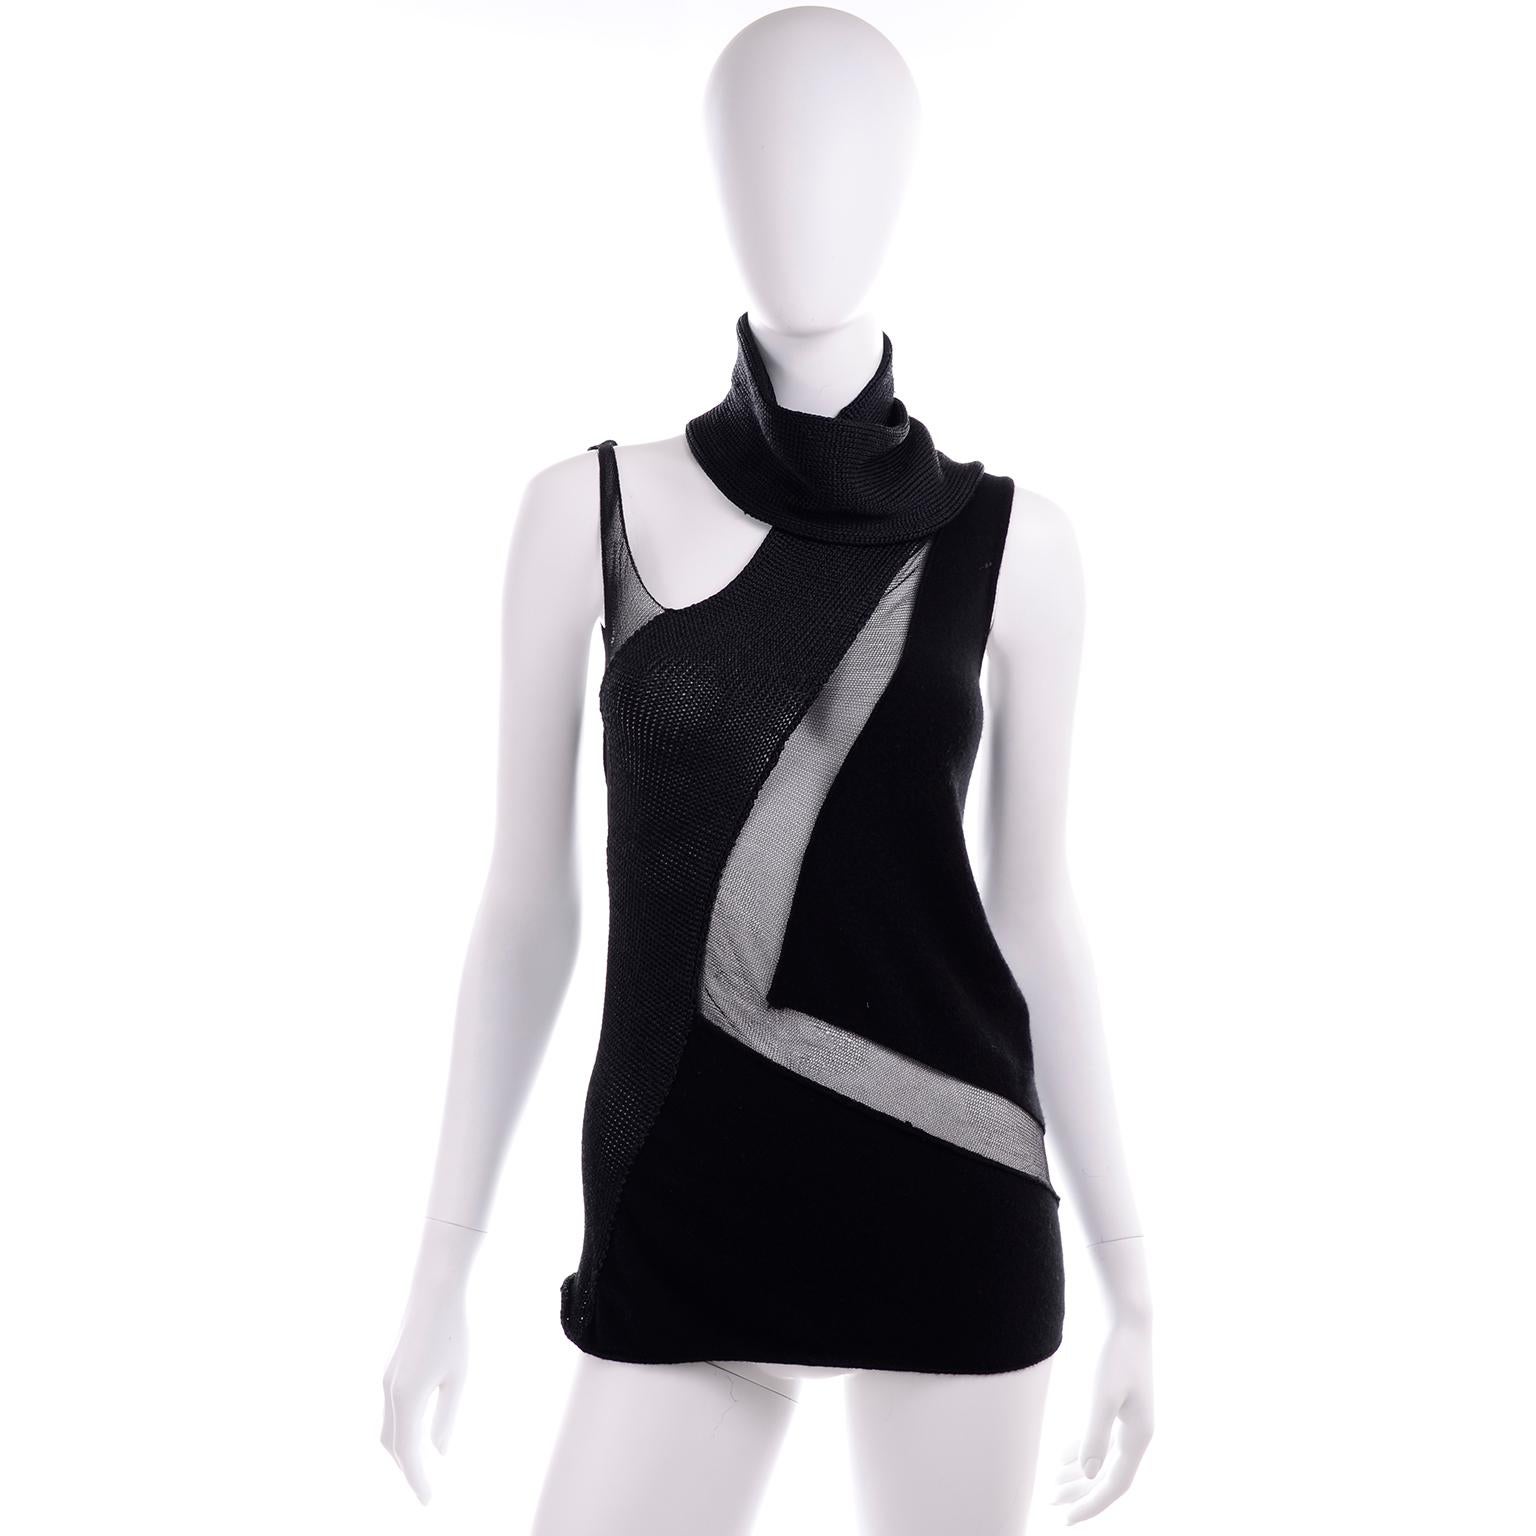 This gorgeous vintage 1990s Donna Karan black knit sleeveless top has a scarf attached at the neckline and peek a boo sheer mesh panels. The top has snap closures to secure bra and slips overhead. This would be a great piece to wear with trousers or